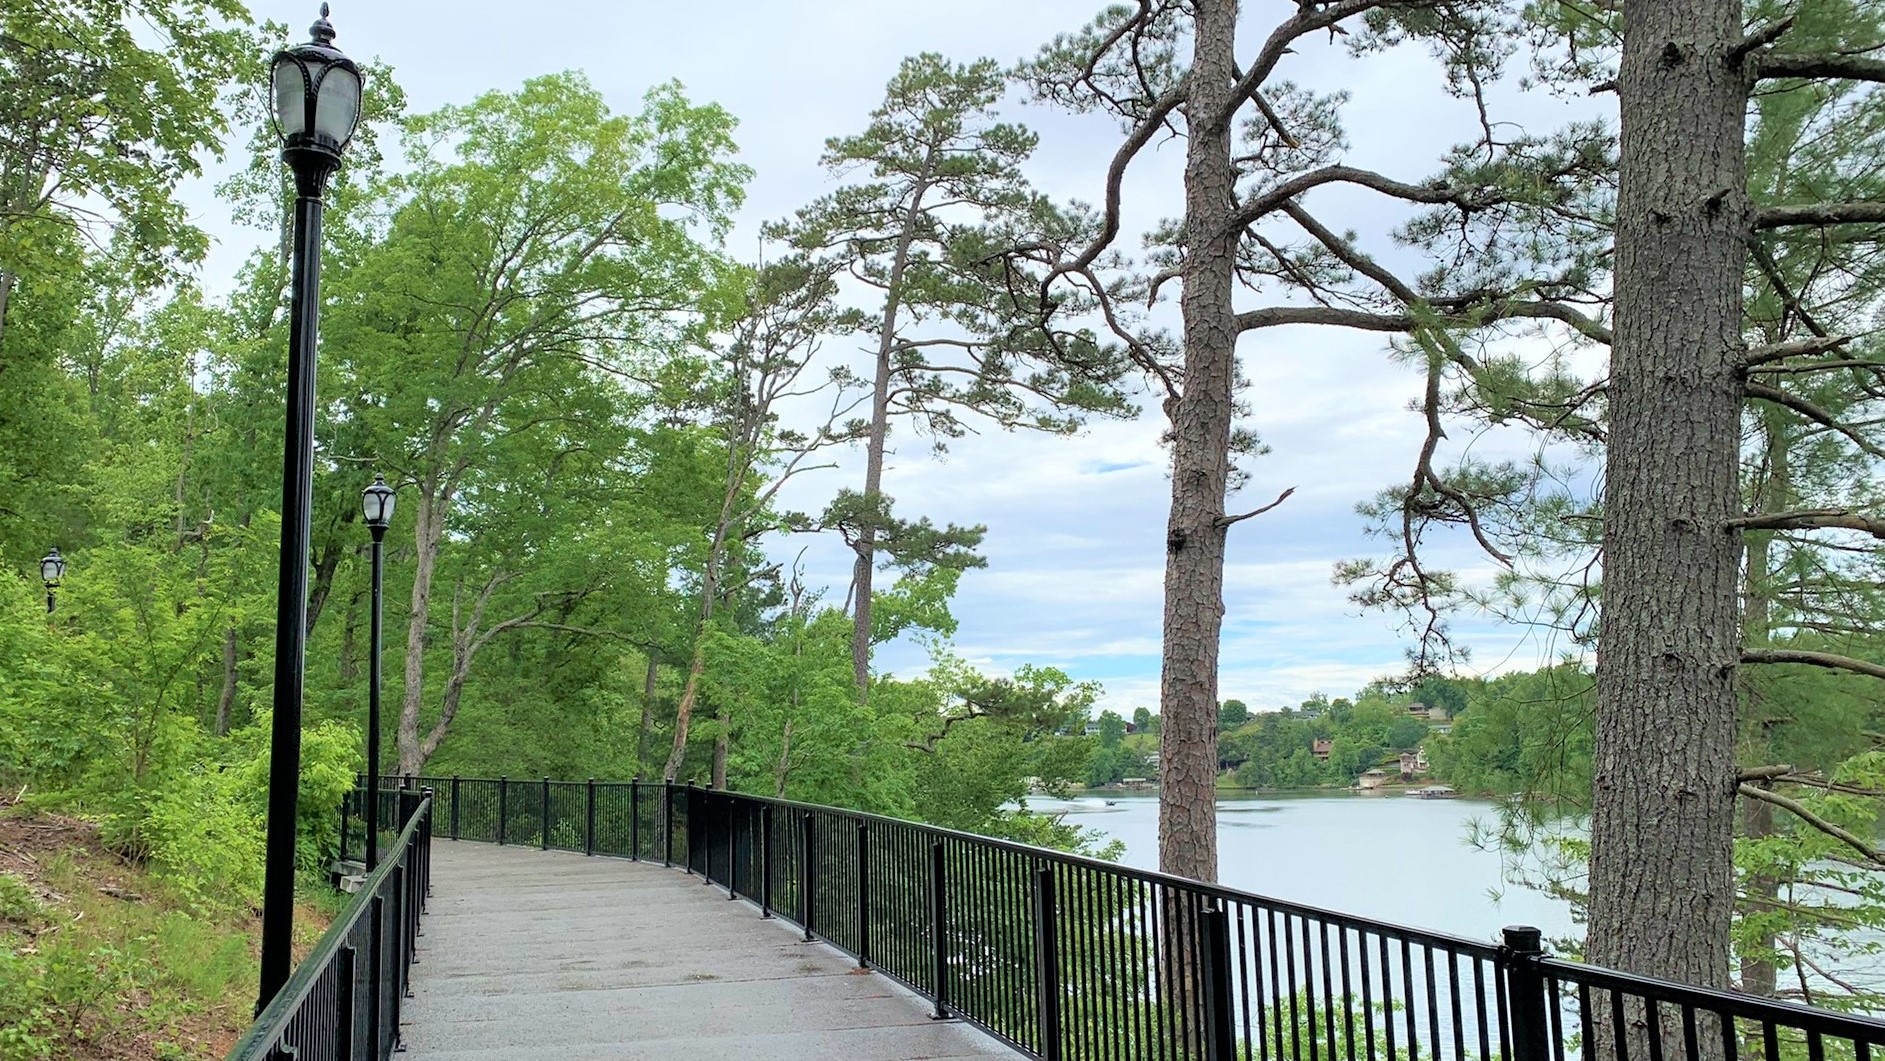 View of Lake Hickory from Riverwalk